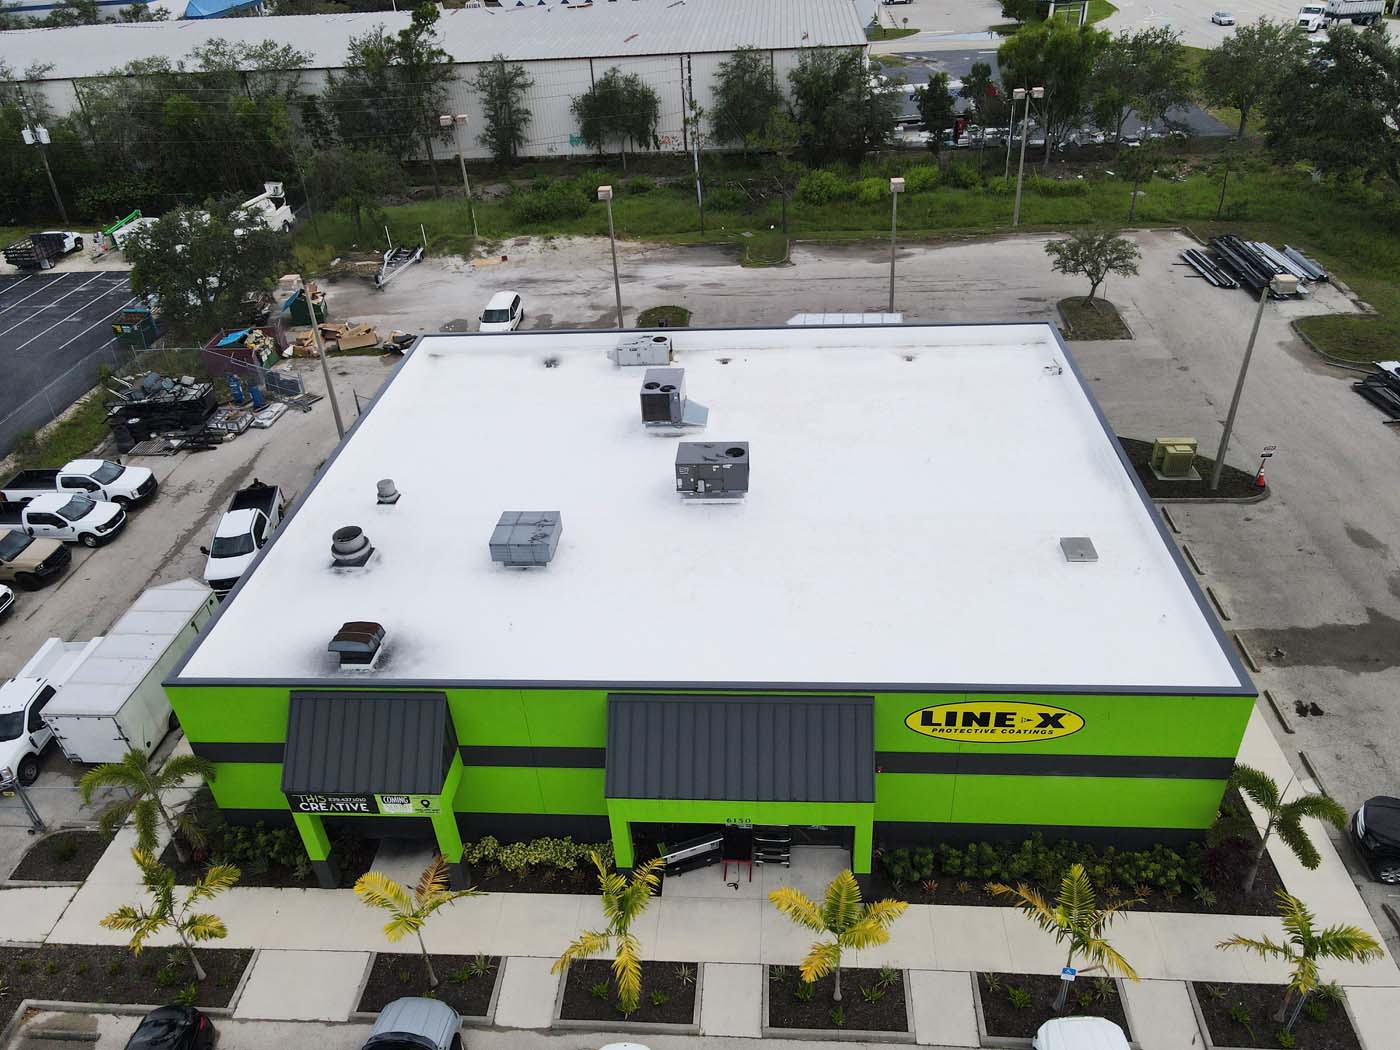 Commercial Flat Roof for Line-X